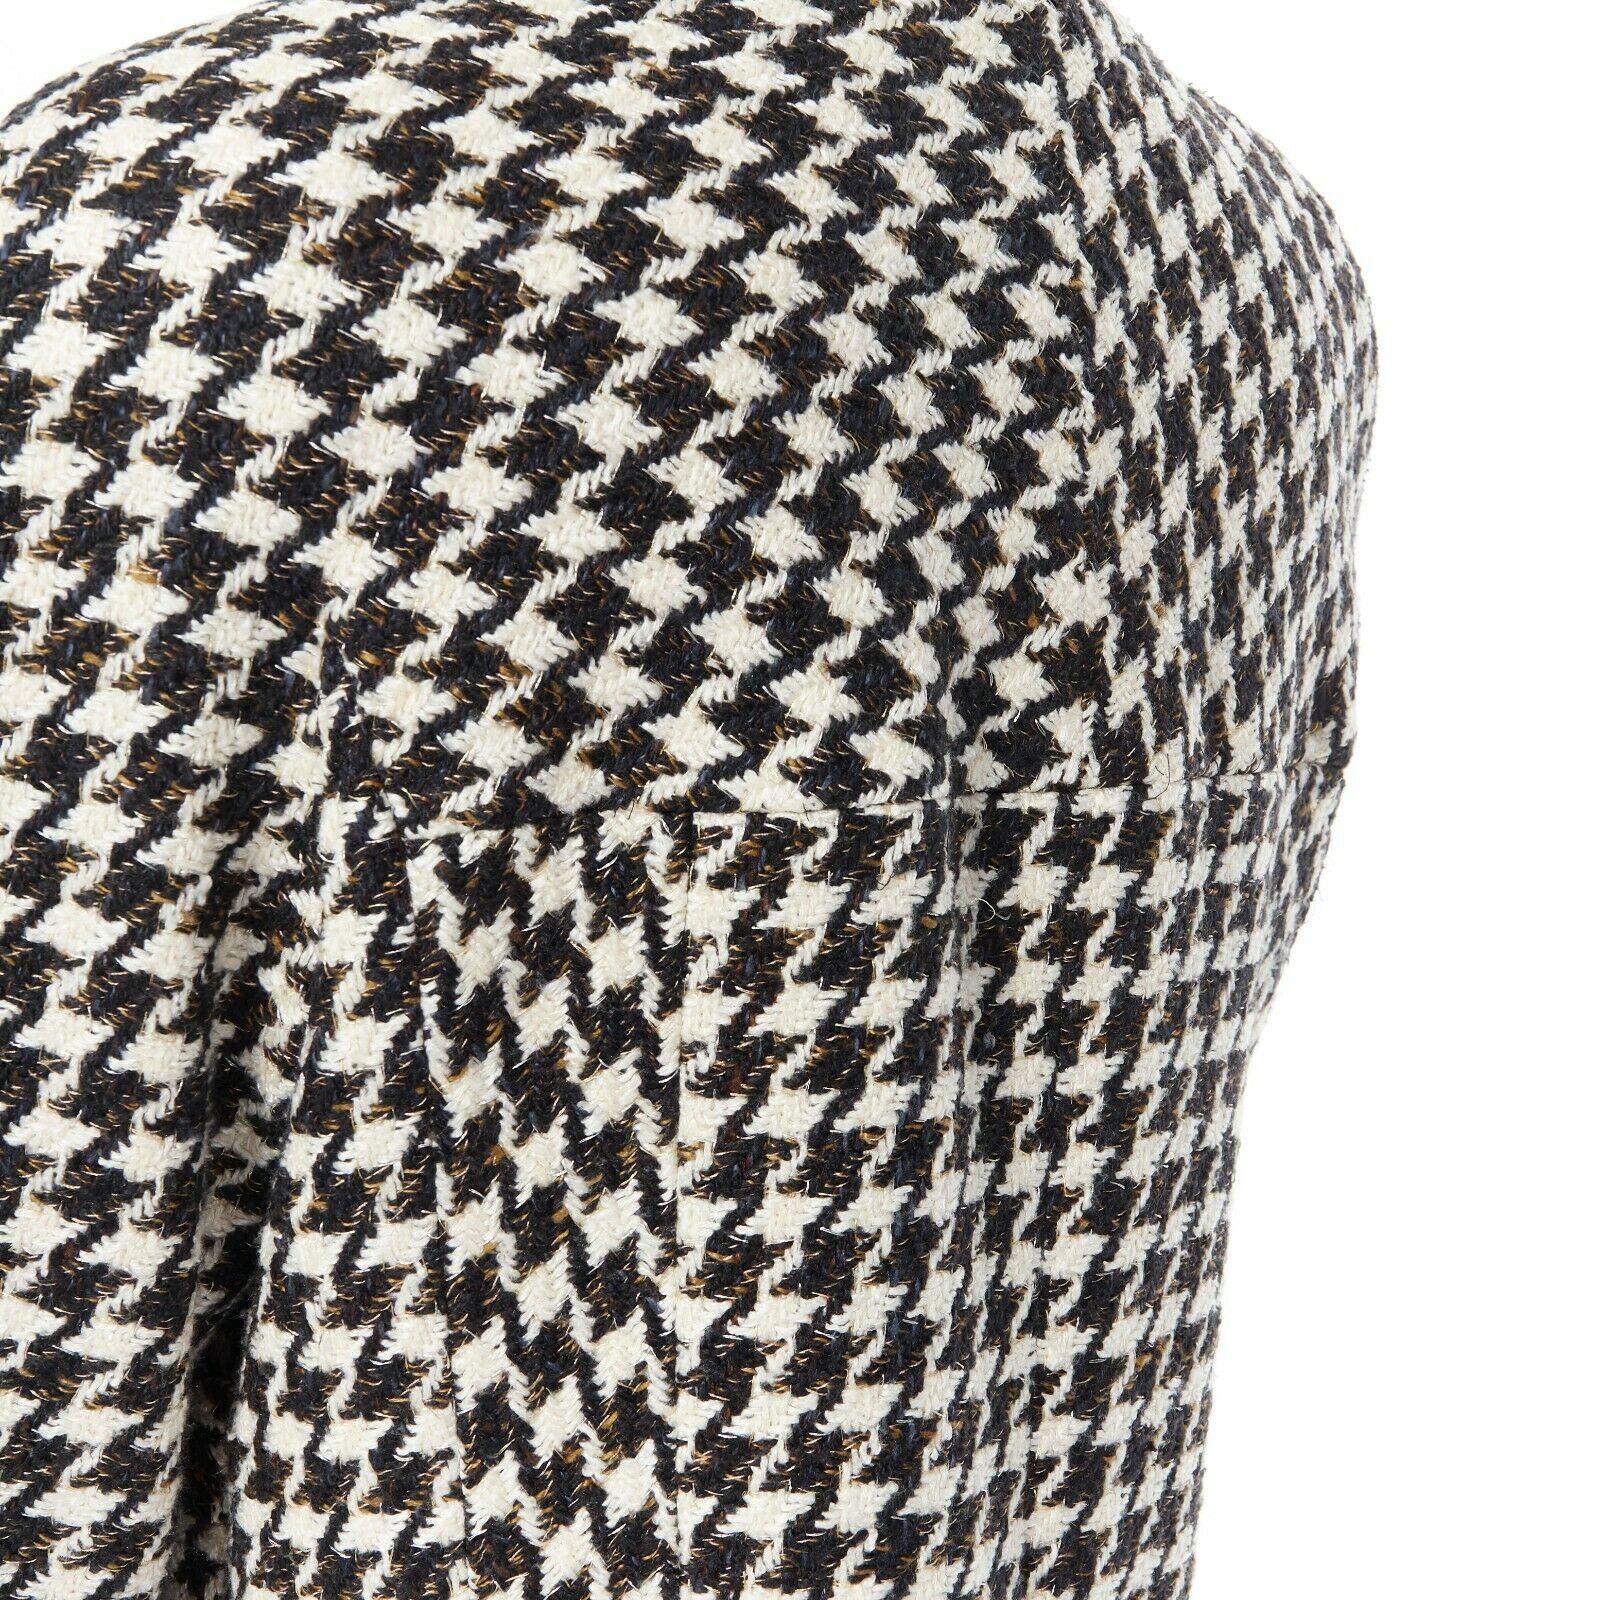 CHANEL 06P black white houndstooth tweed asymmetric wrapped front jacket FR40 3